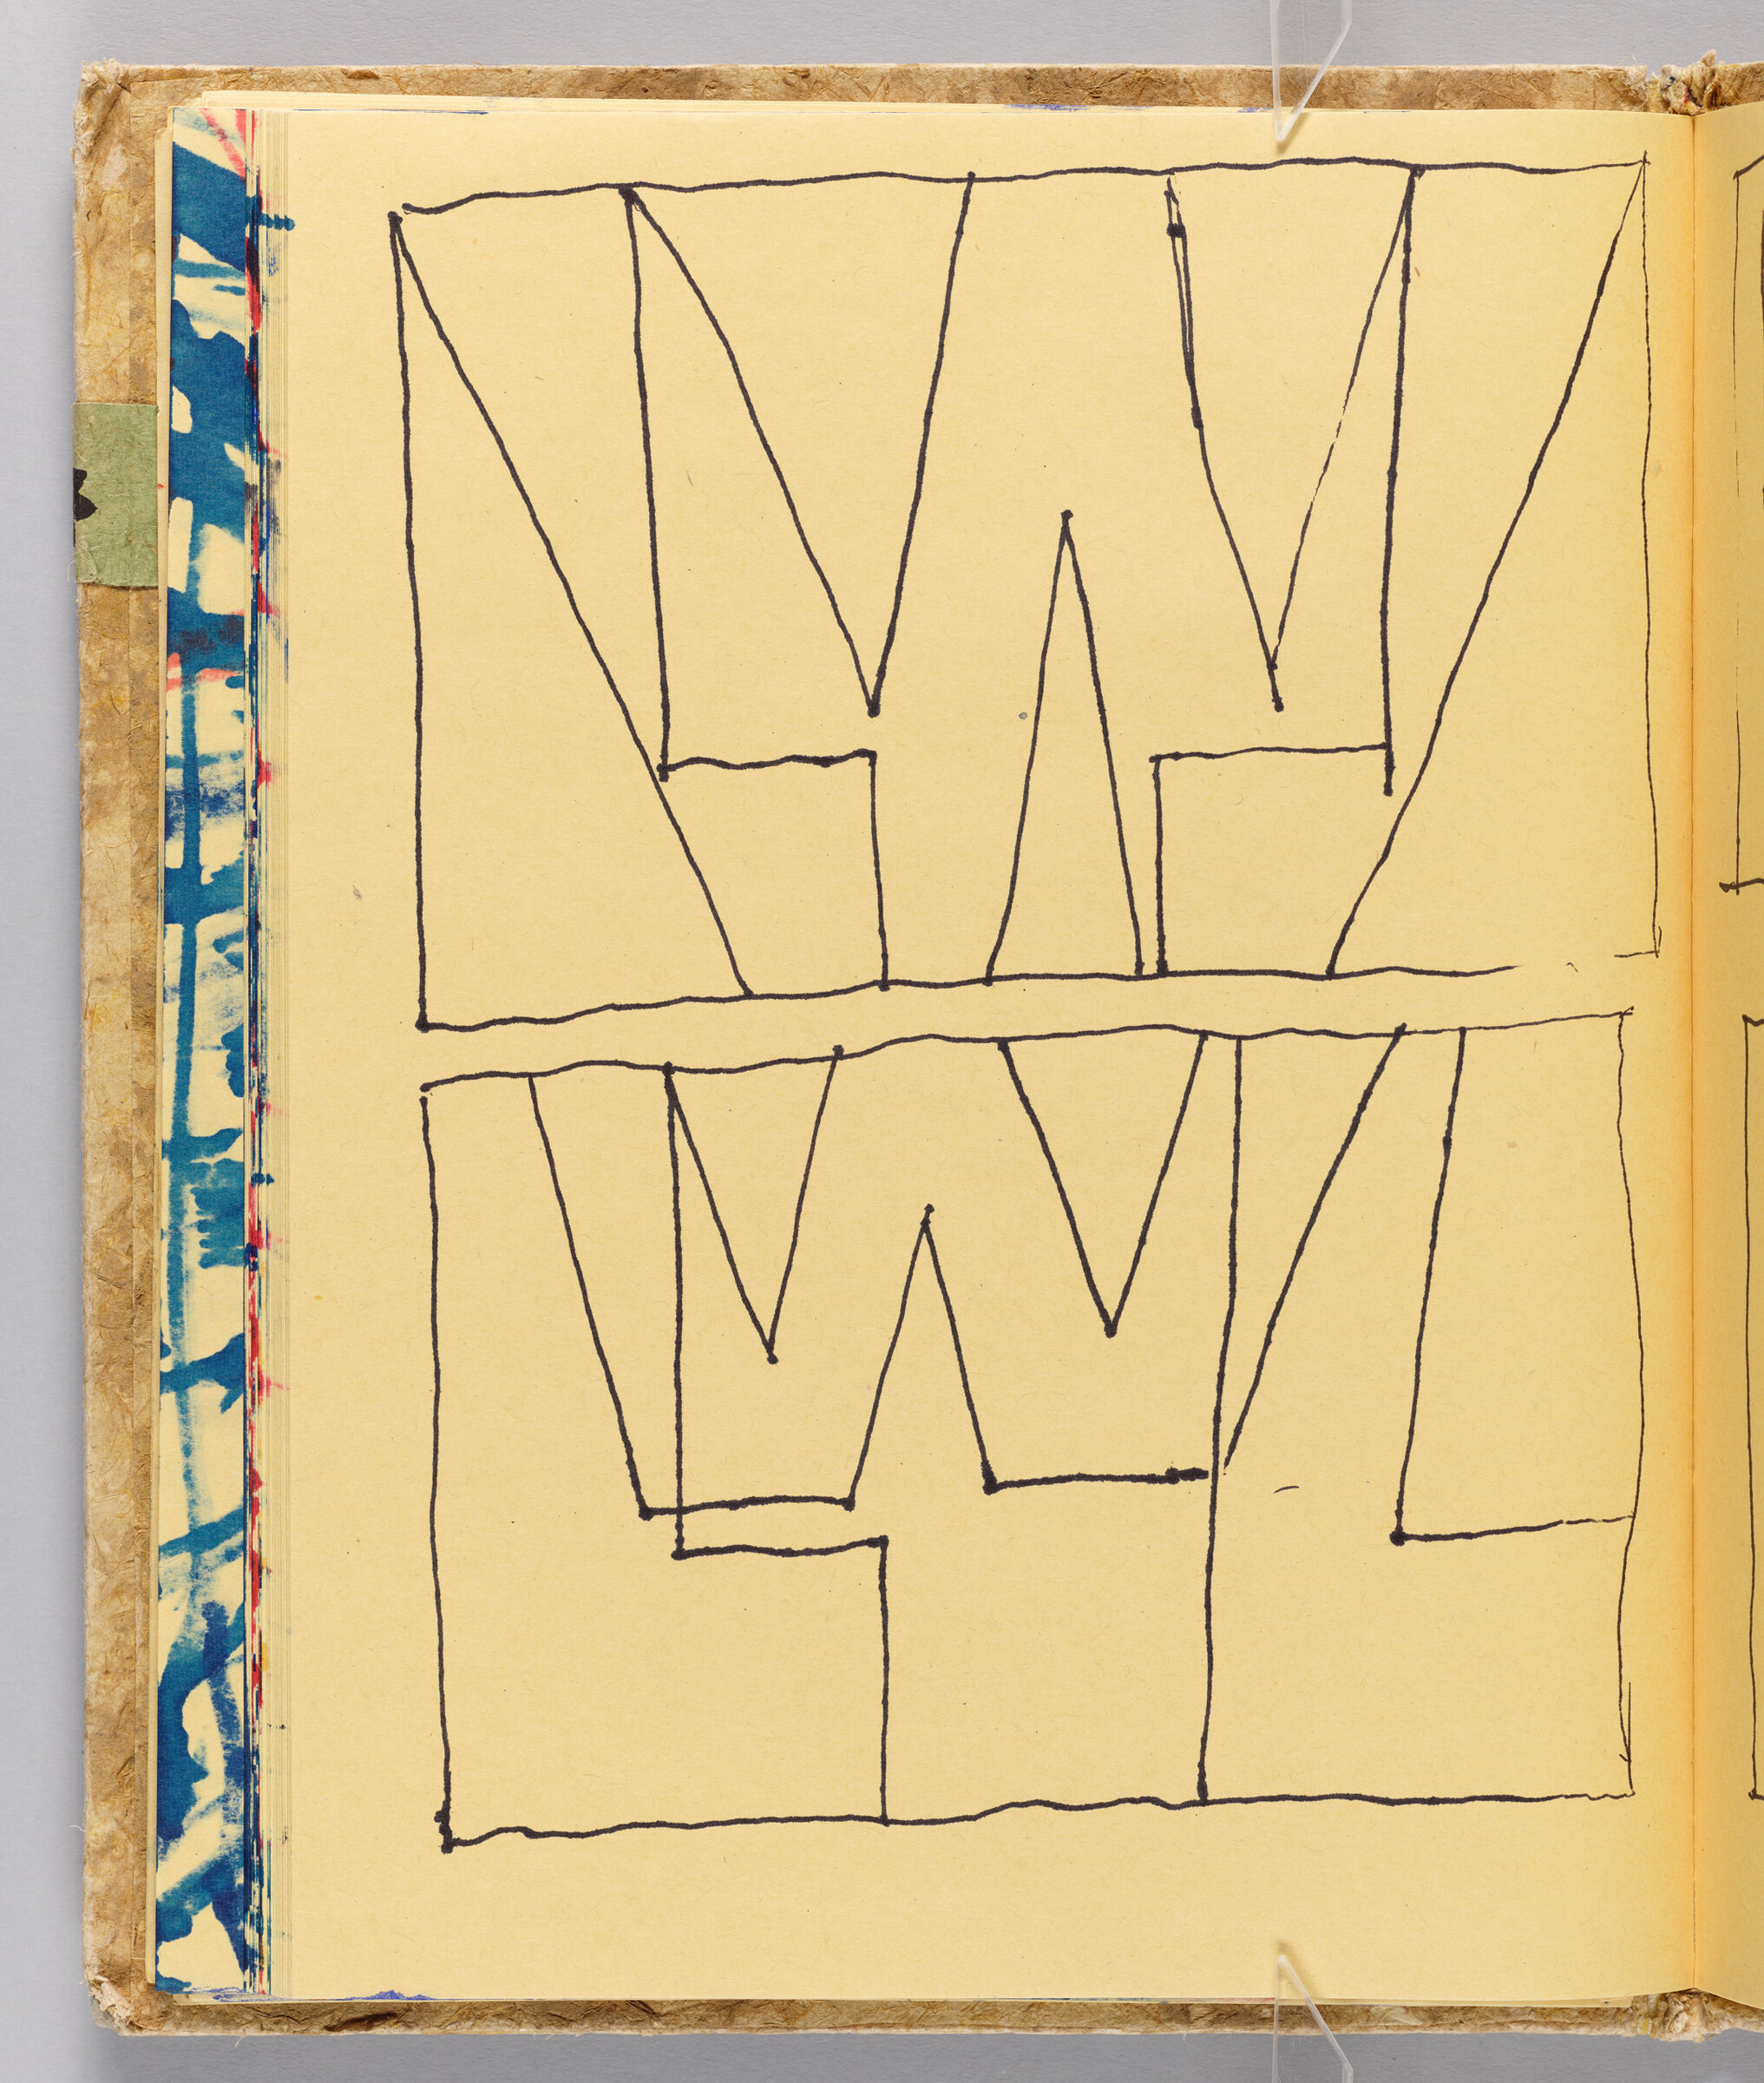 Untitled (Lwl Designs, Left Page); Untitled (Lwl Designs, Right Page)